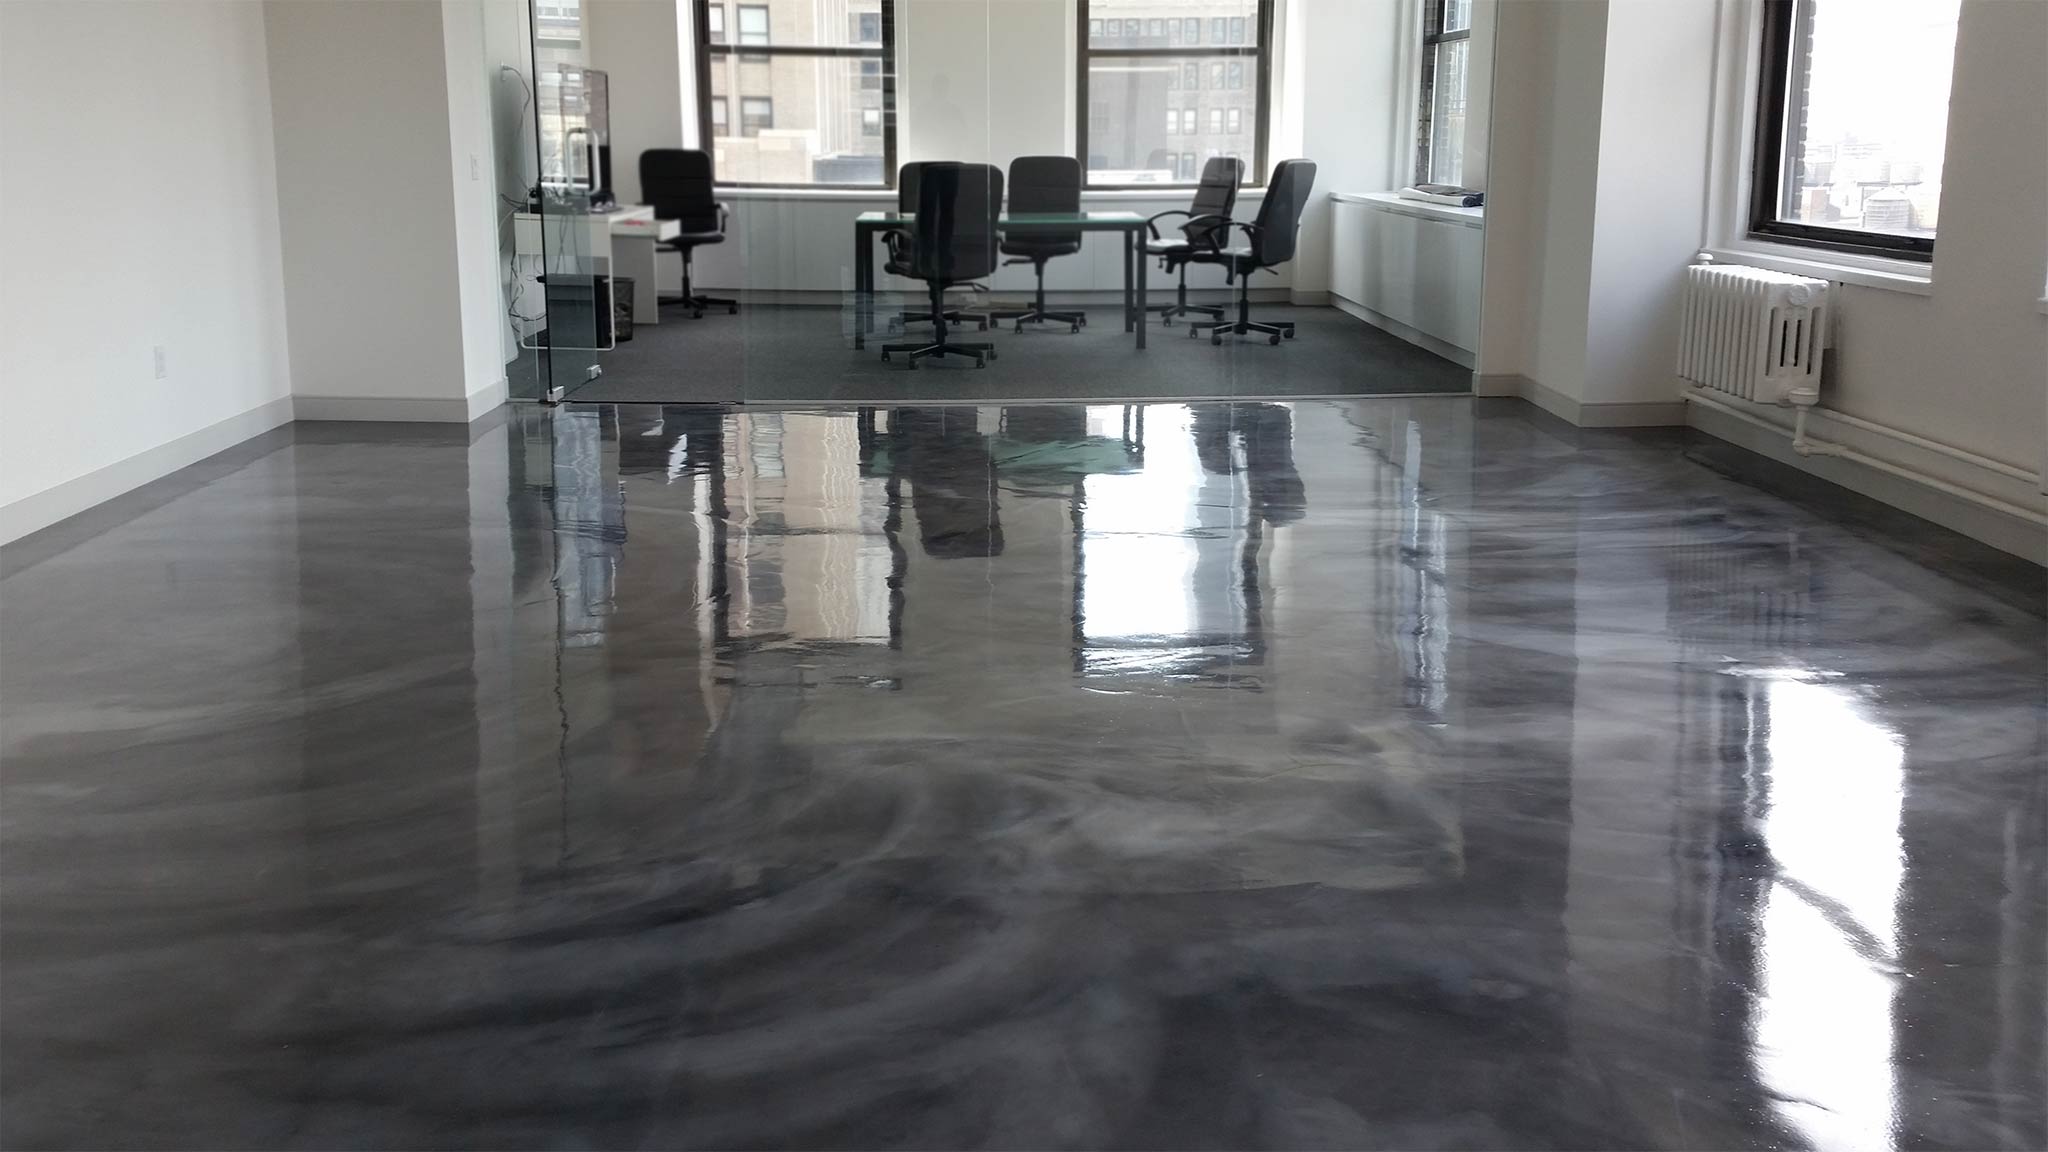 Polished concrete floor in the gallery by Duraamen